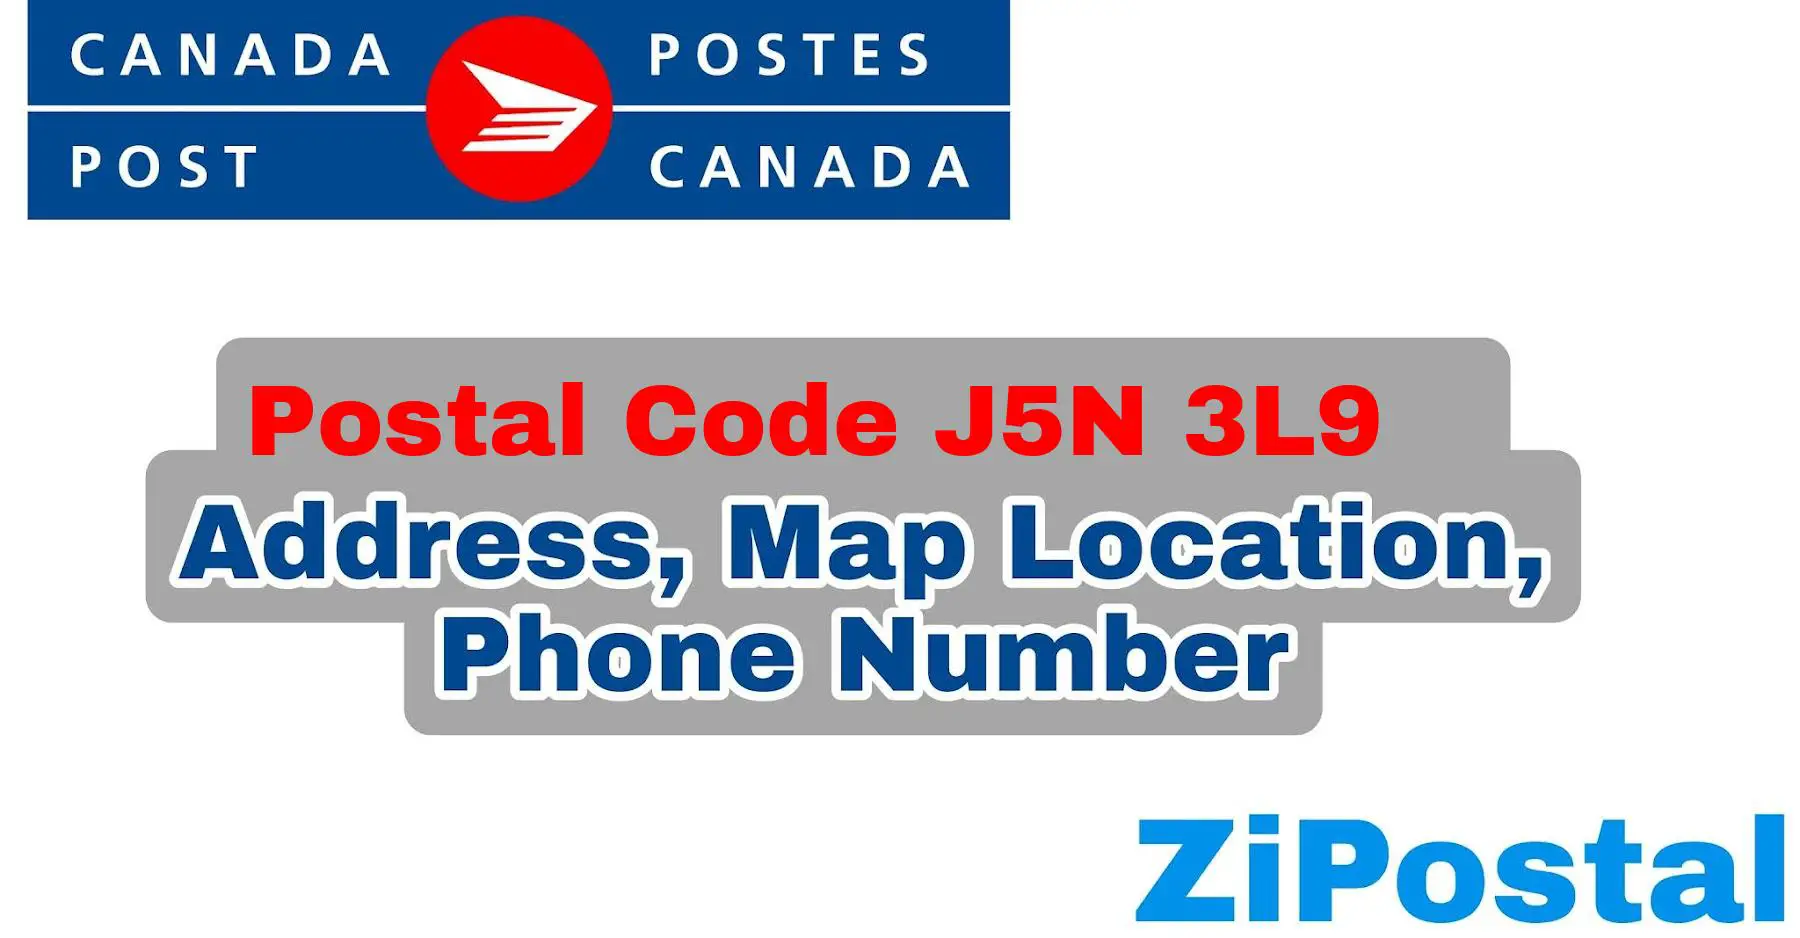 Postal Code J5N 3L9 Address Map Location and Phone Number